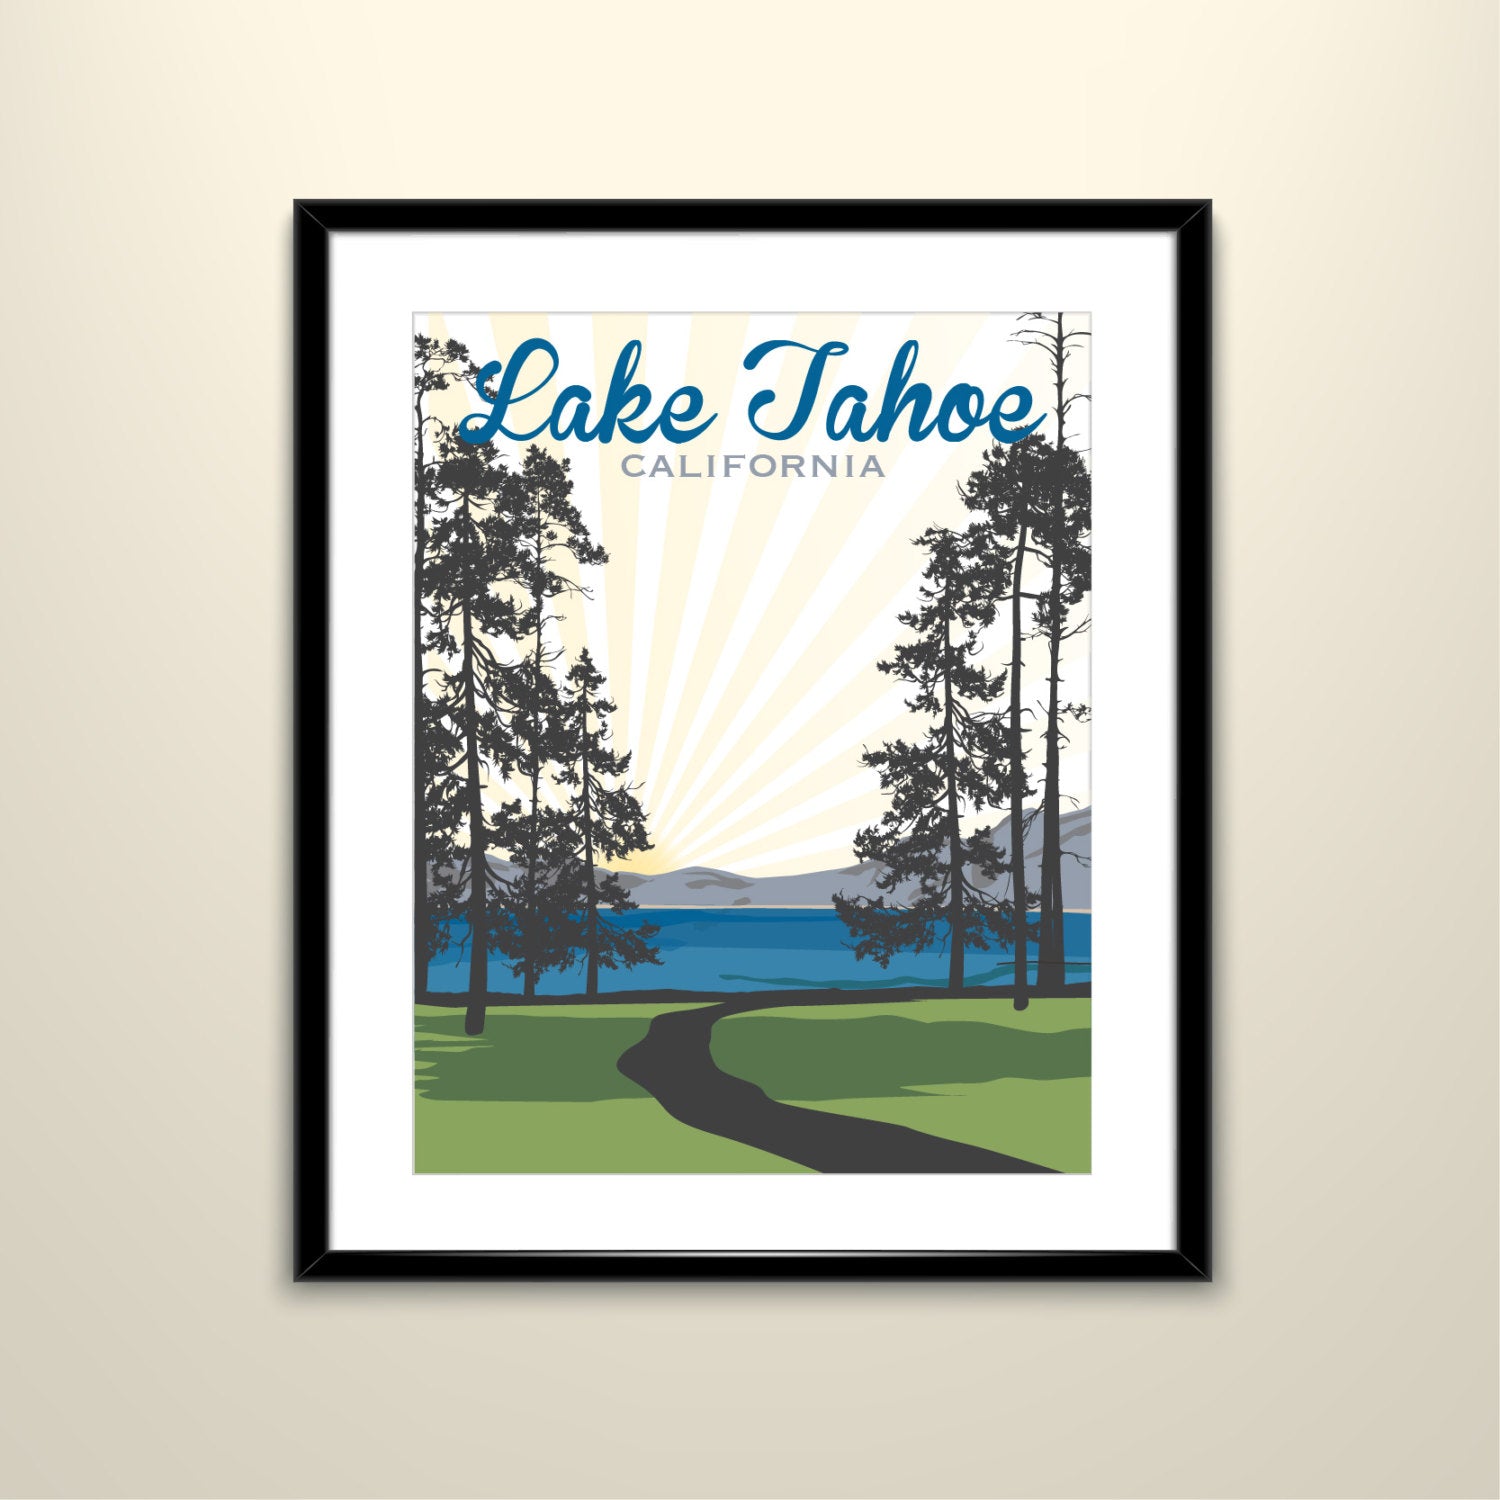 South Lake Tahoe Vintage Travel 11x14 Poster - Wedding Poster personalized with Names and date (frame not included)